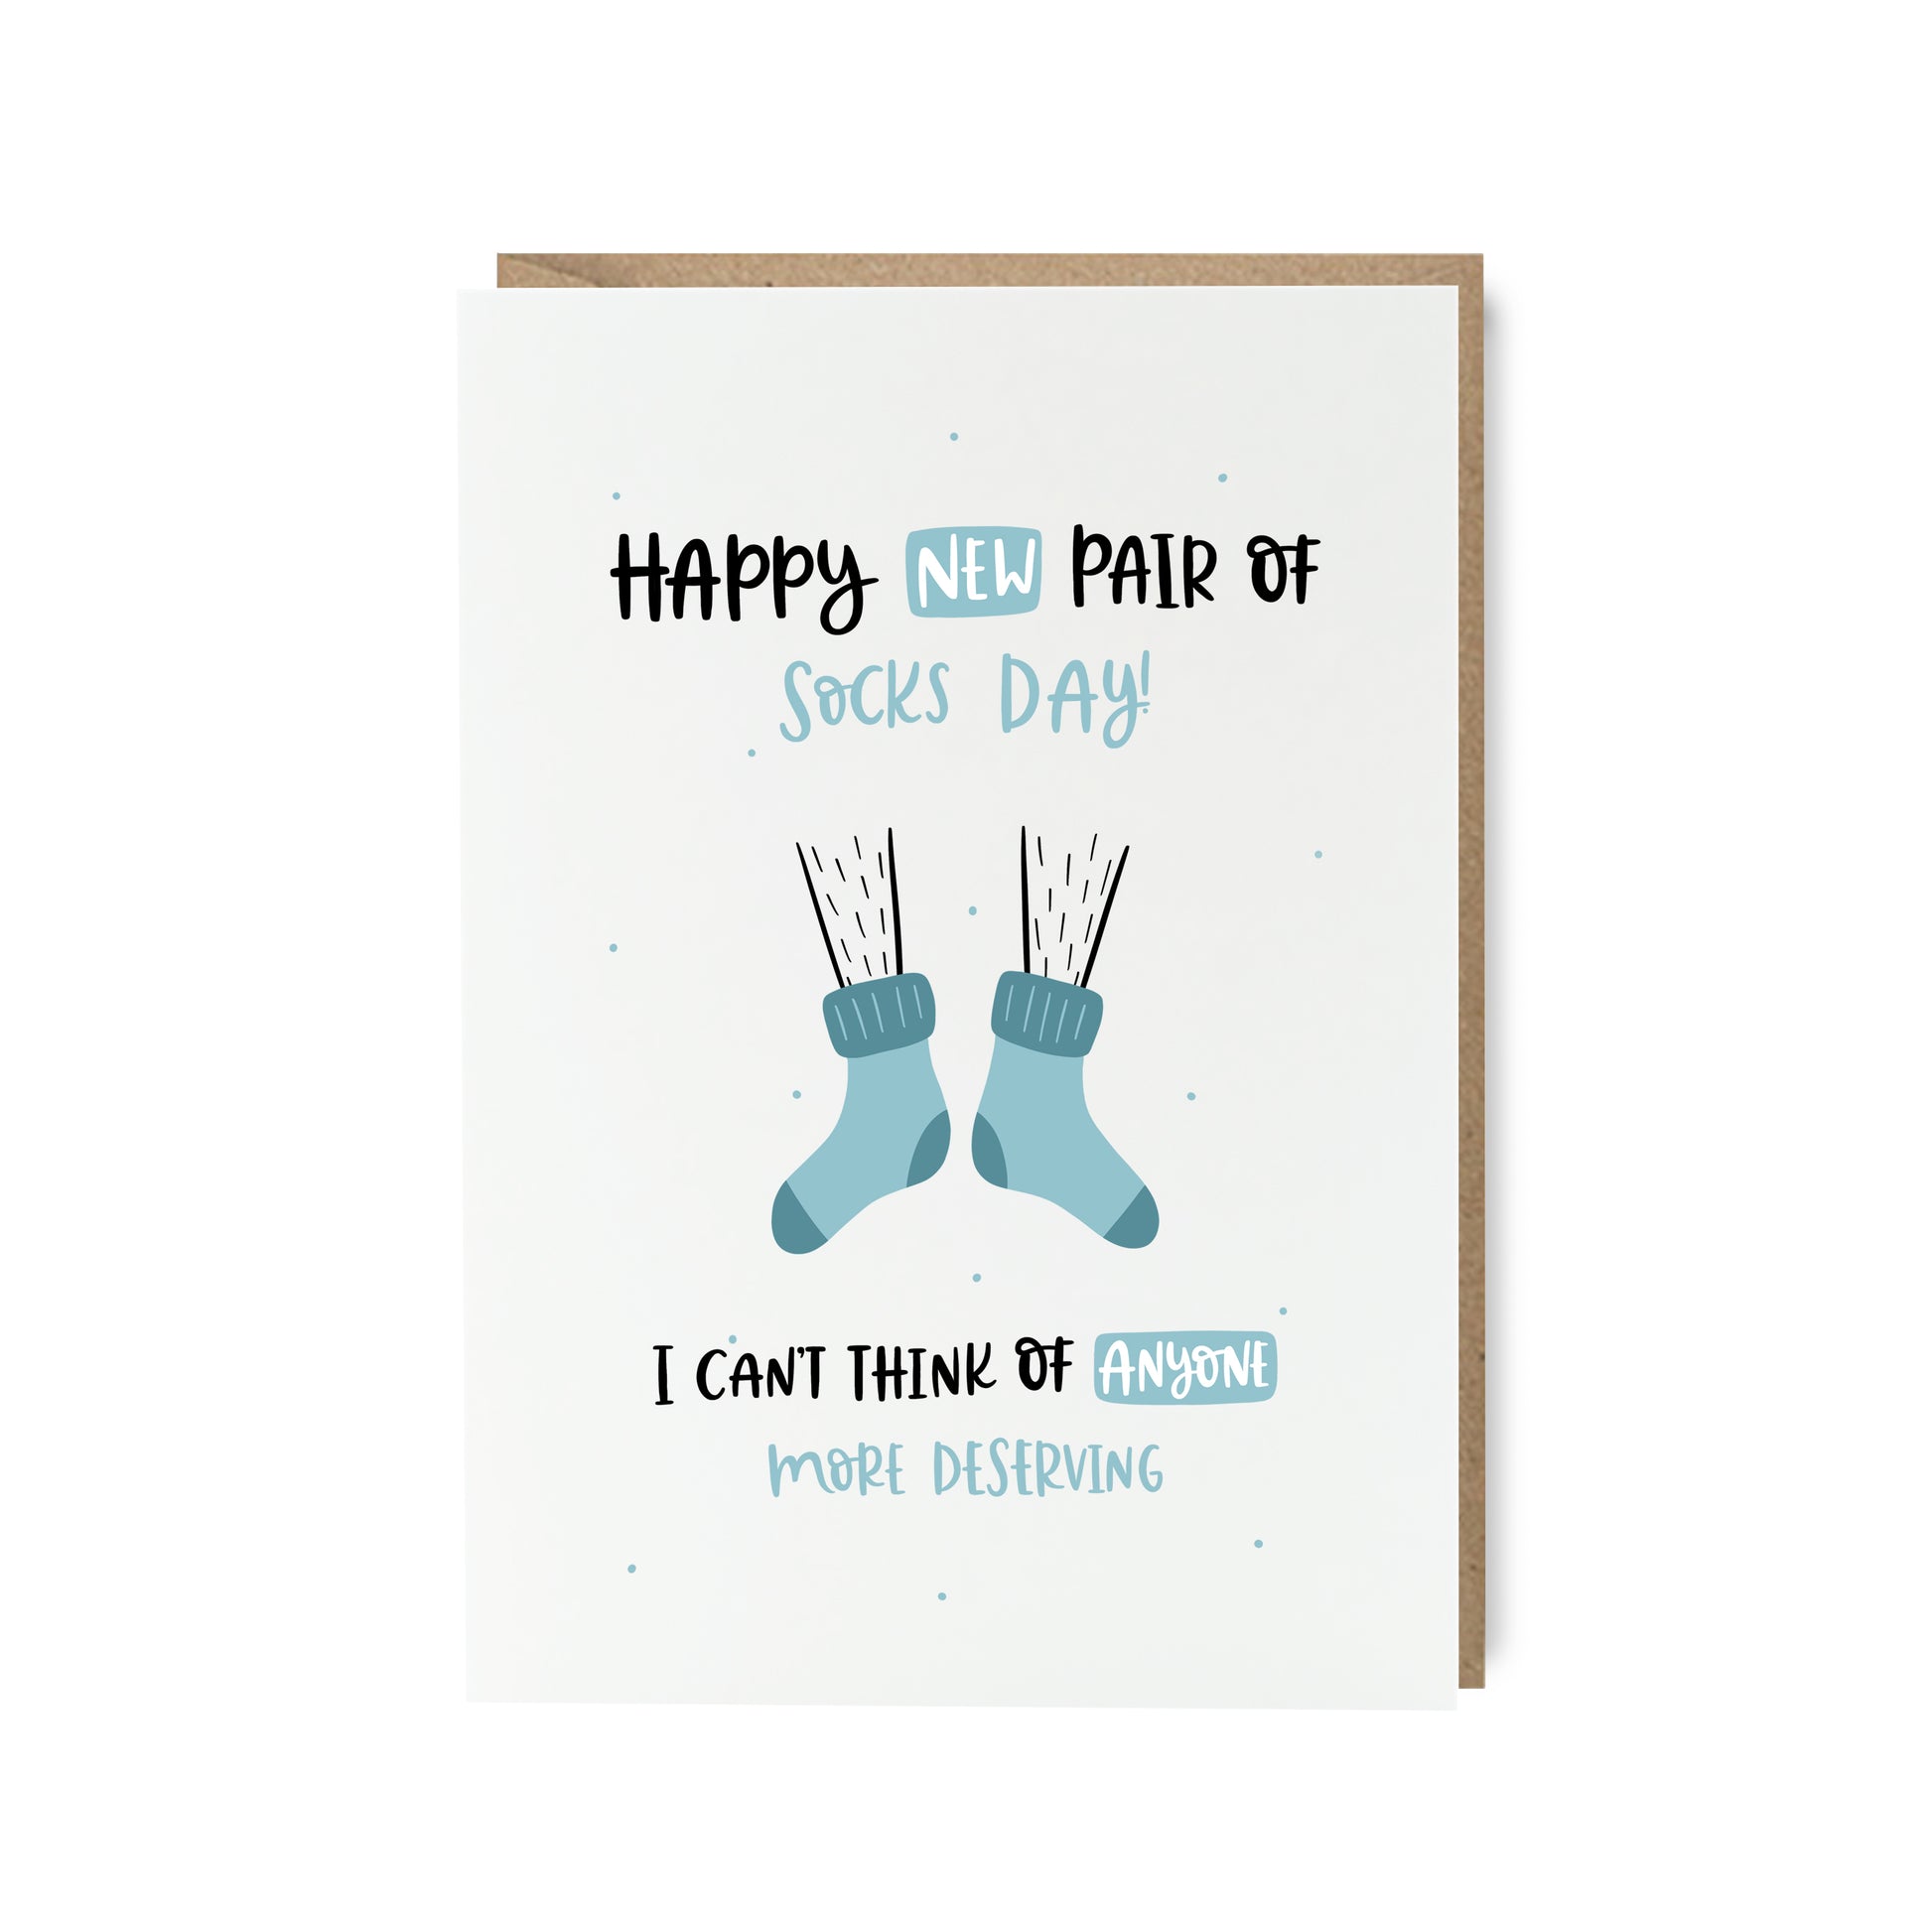 New pair of socks day funny card for dad for father's day by abbie imagine